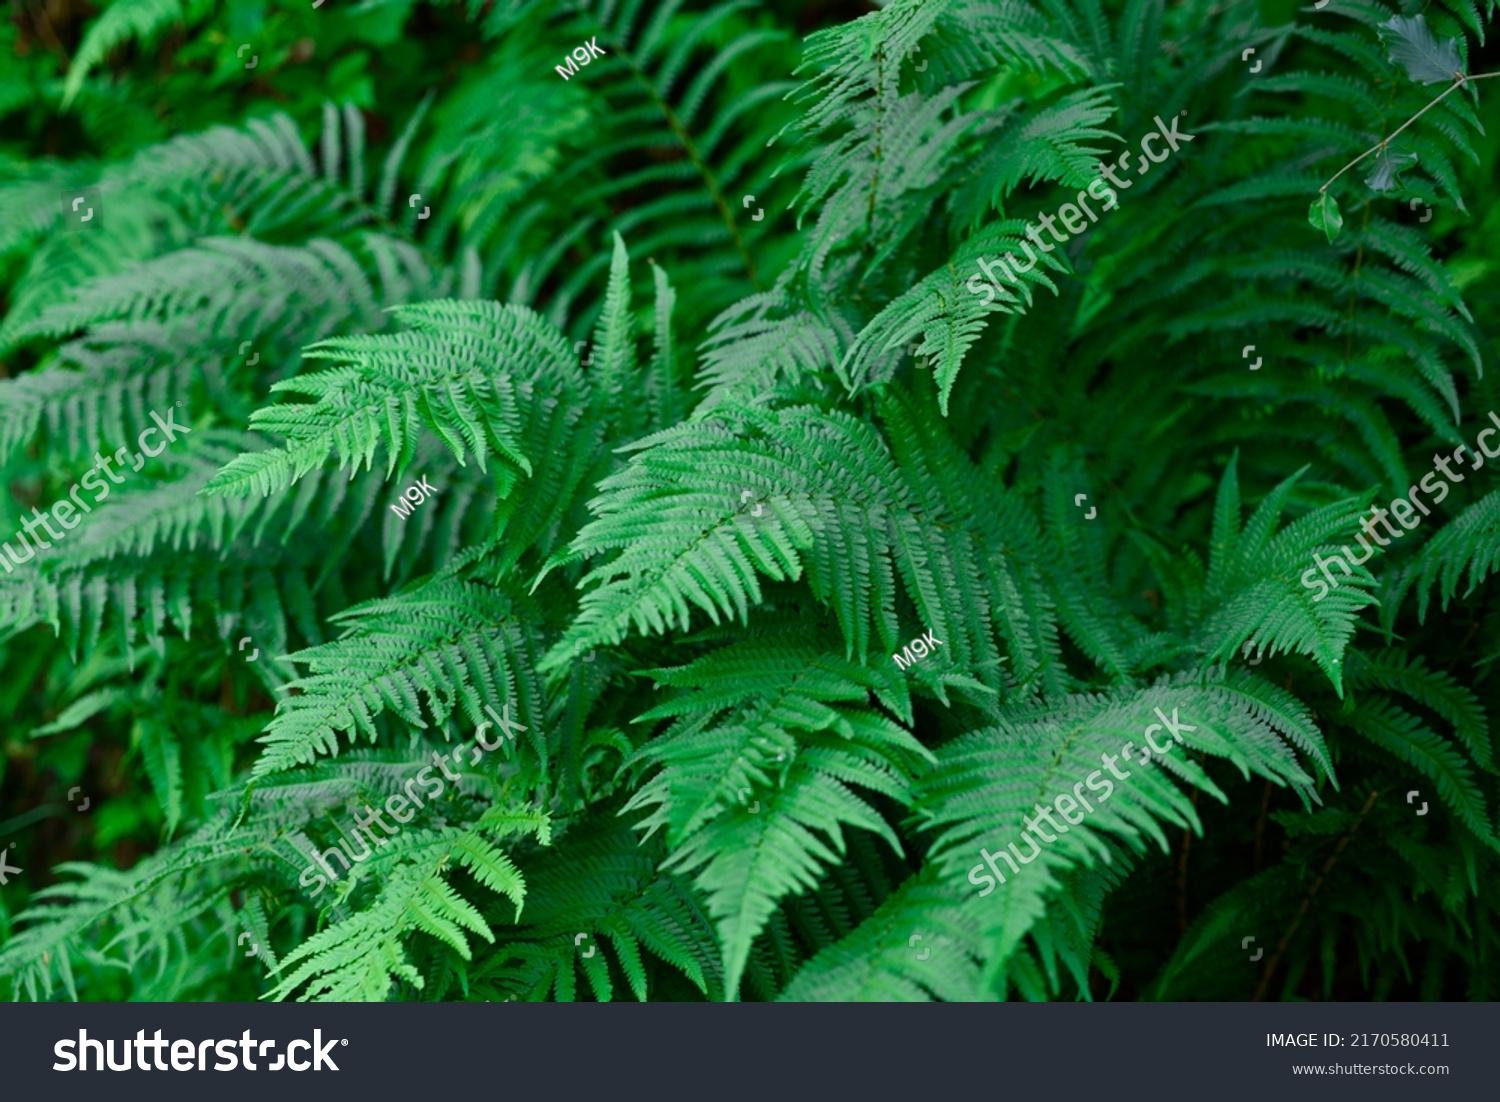 Beautiful fern leaf texture in nature. Natural ferns background Fern leaves Close up ferns nature. Fern plants in forest Background of the ferns Nature concept. Green ferns nature. Natural floral fern #2170580411